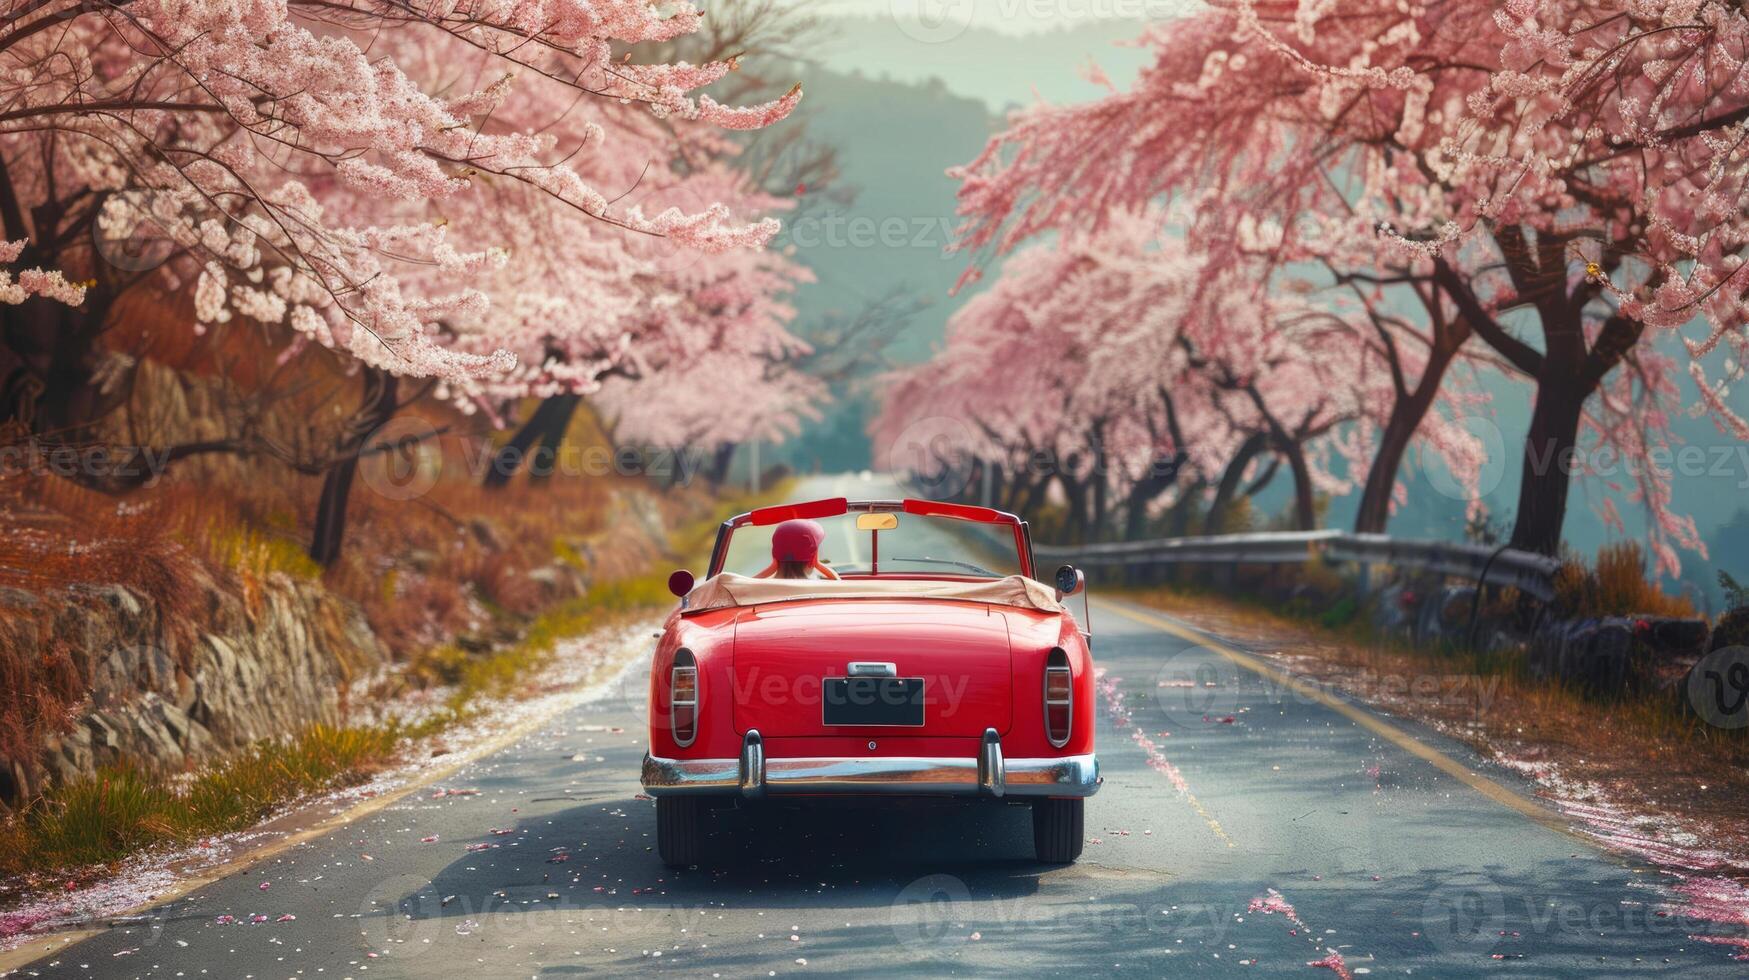 classic convertible drives down open road, cherry blossoms fall like snow, freedom theme photo